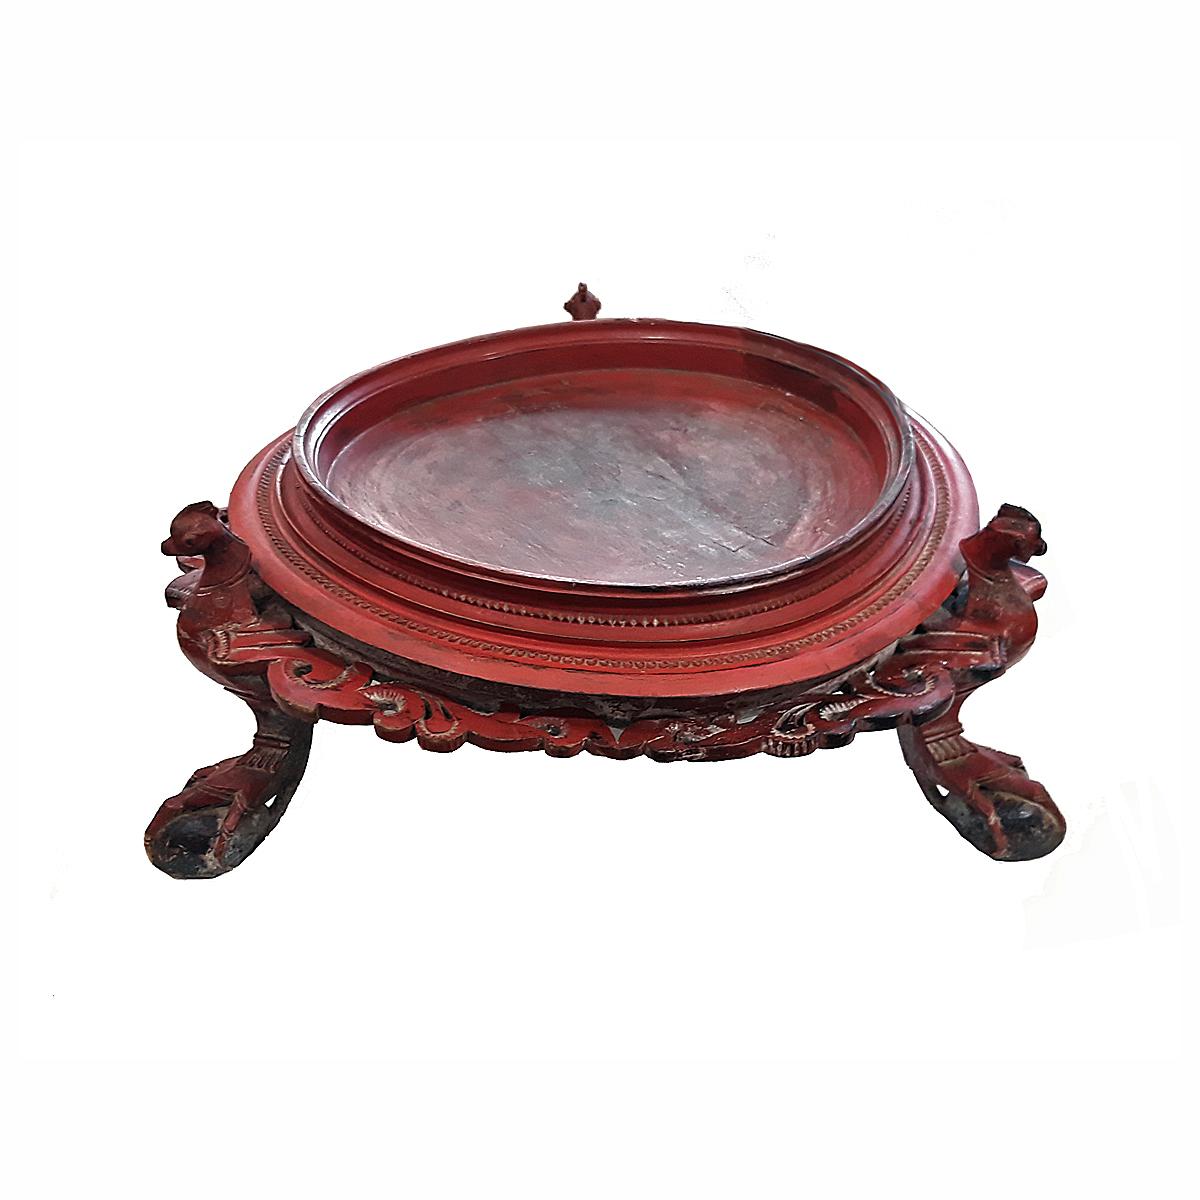 A small pedestal tray table, hand-carved in Burma (Myanmar), circa 1890. 
Red lacquer, hand-carved accents, ball-and-claw feet. A beautiful decorative accent for any dinner table, console, kitchen counter.